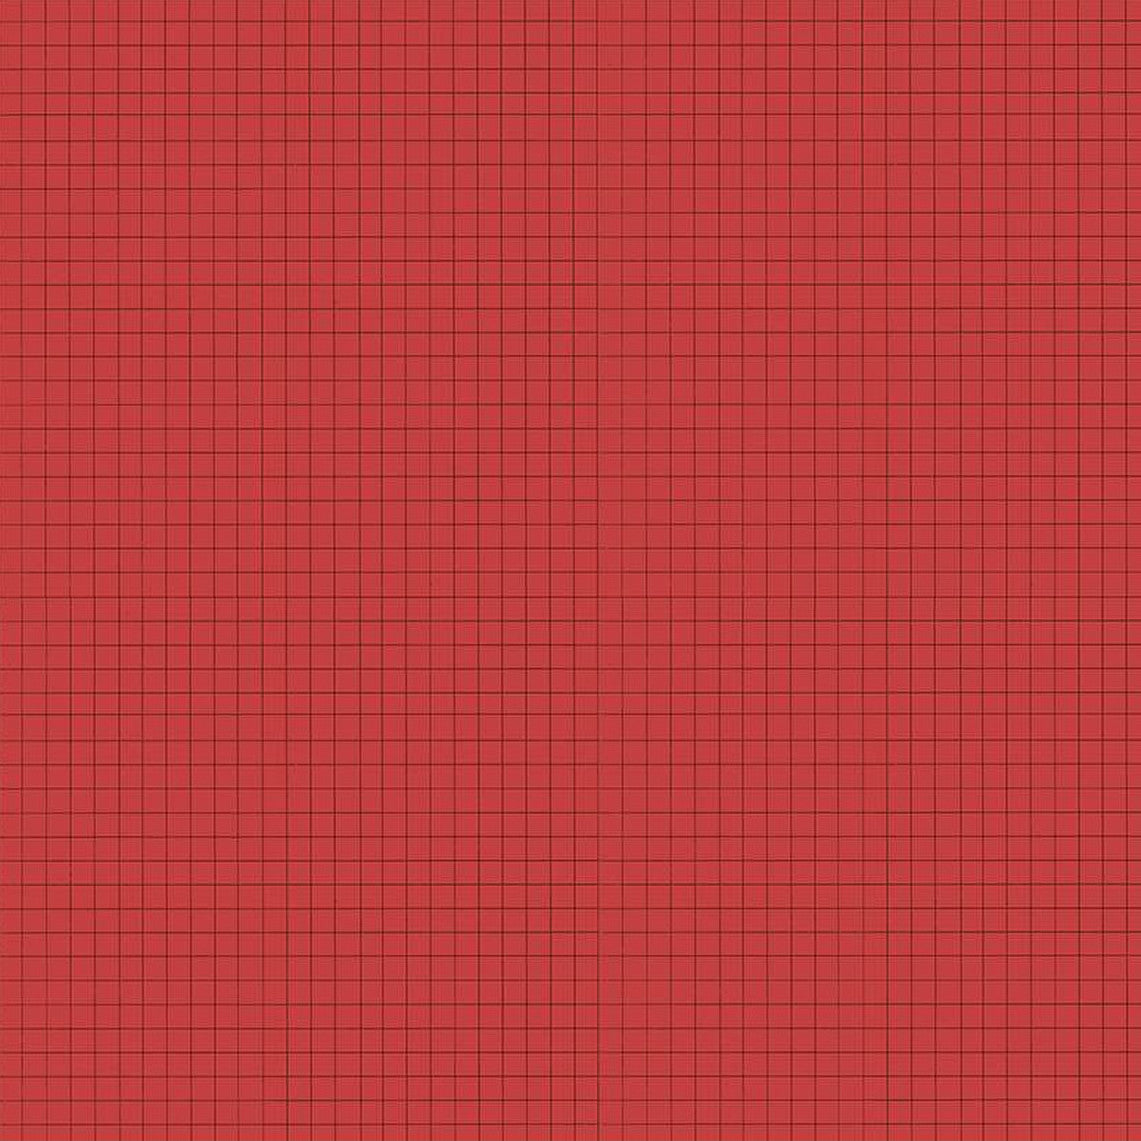 SEW JOURNAL Graph Paper red